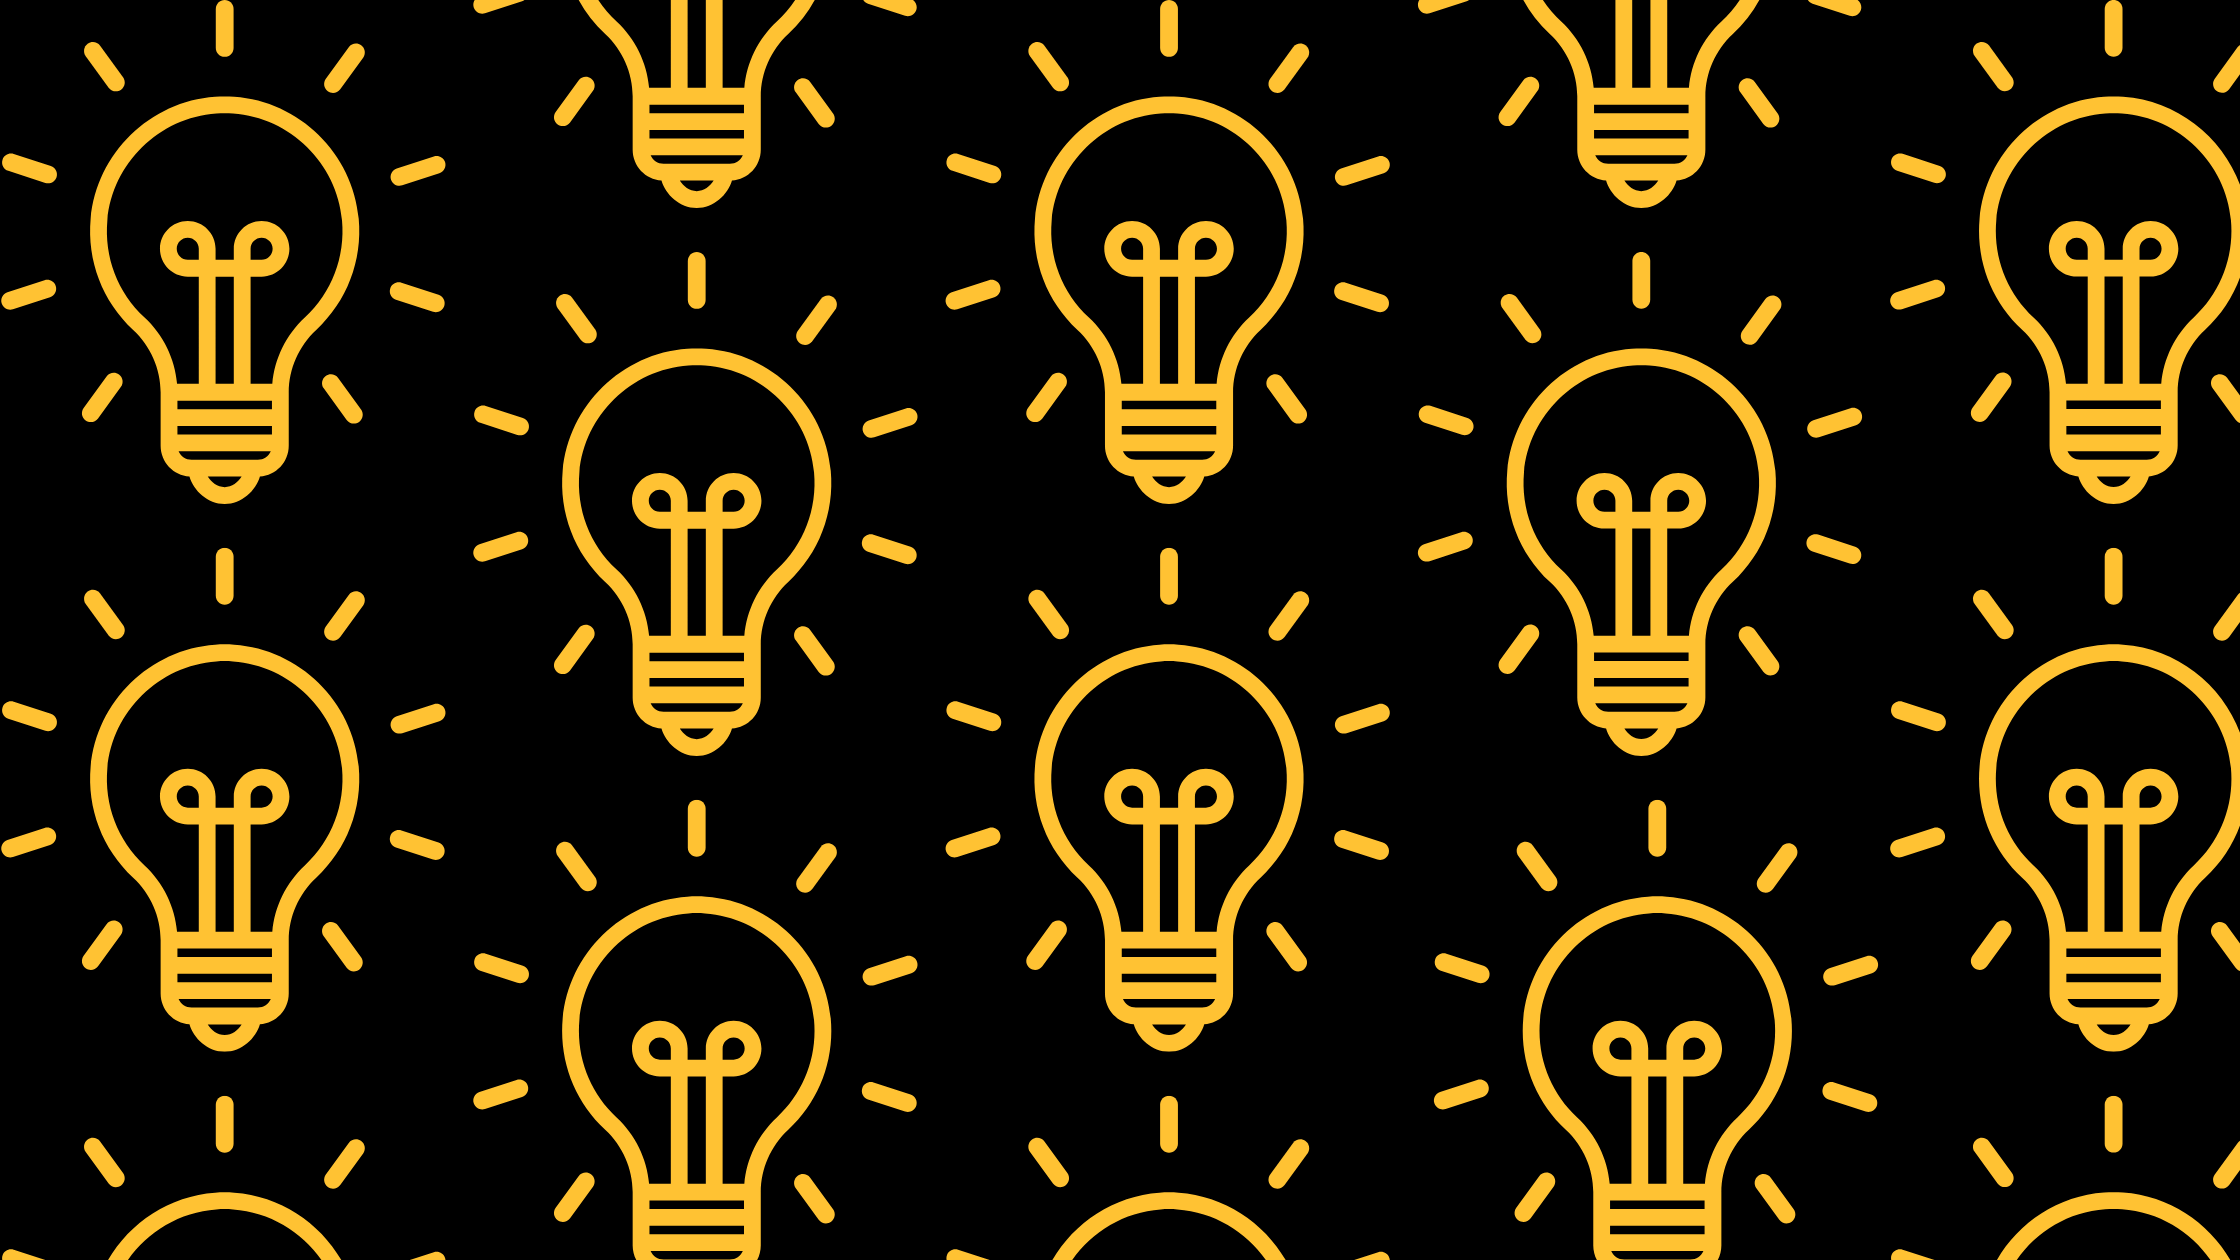 A repeating pattern of lightbulb graphics